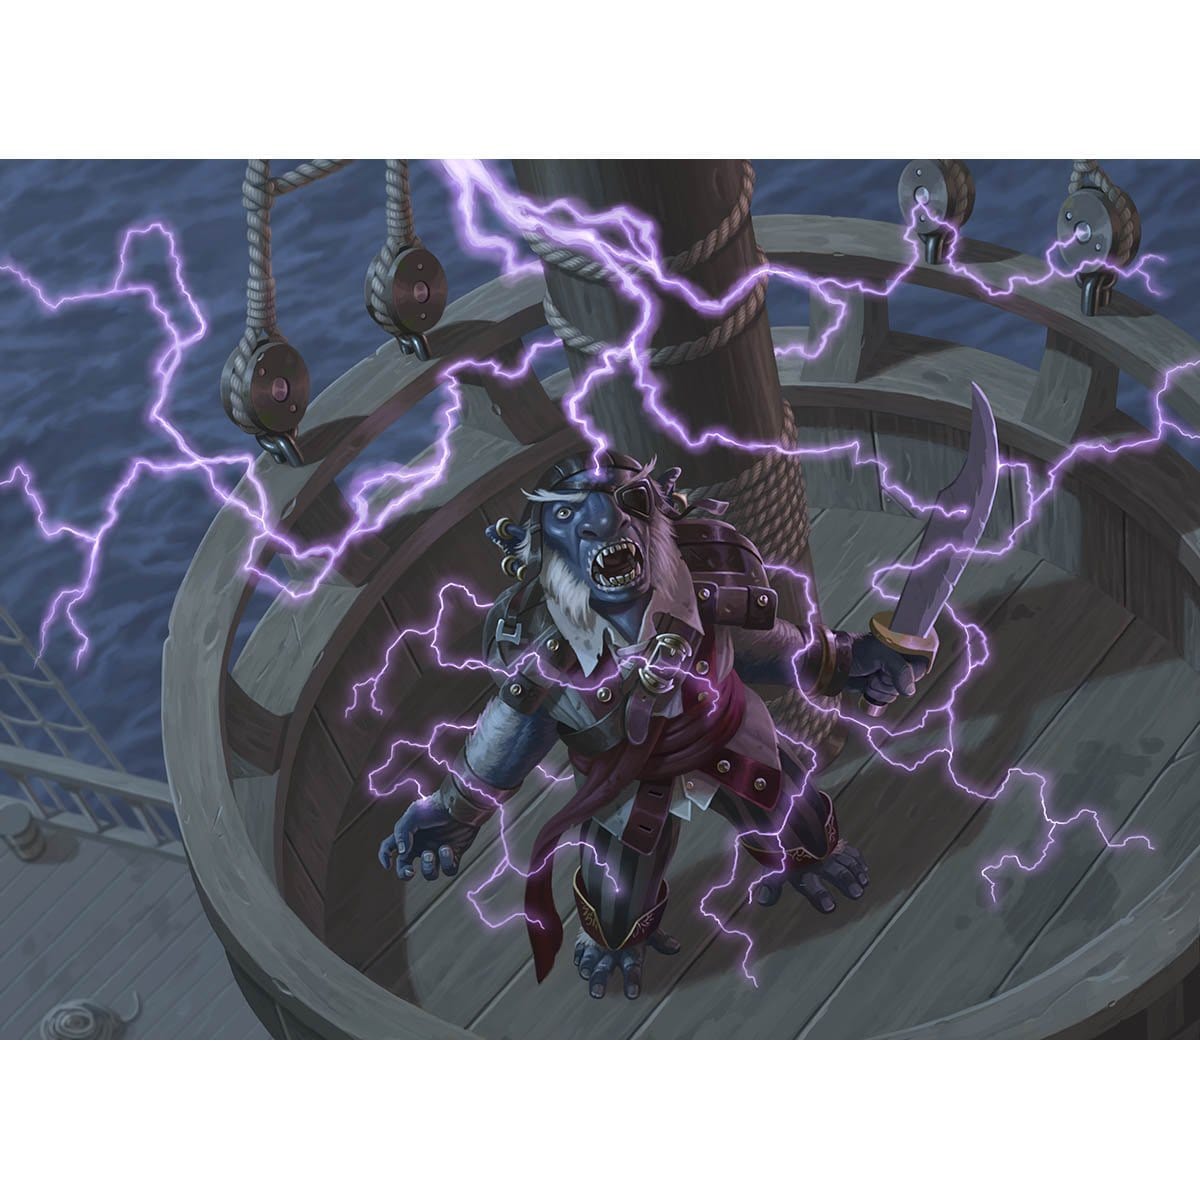 Lightning Strike Print - Print - Original Magic Art - Accessories for Magic the Gathering and other card games